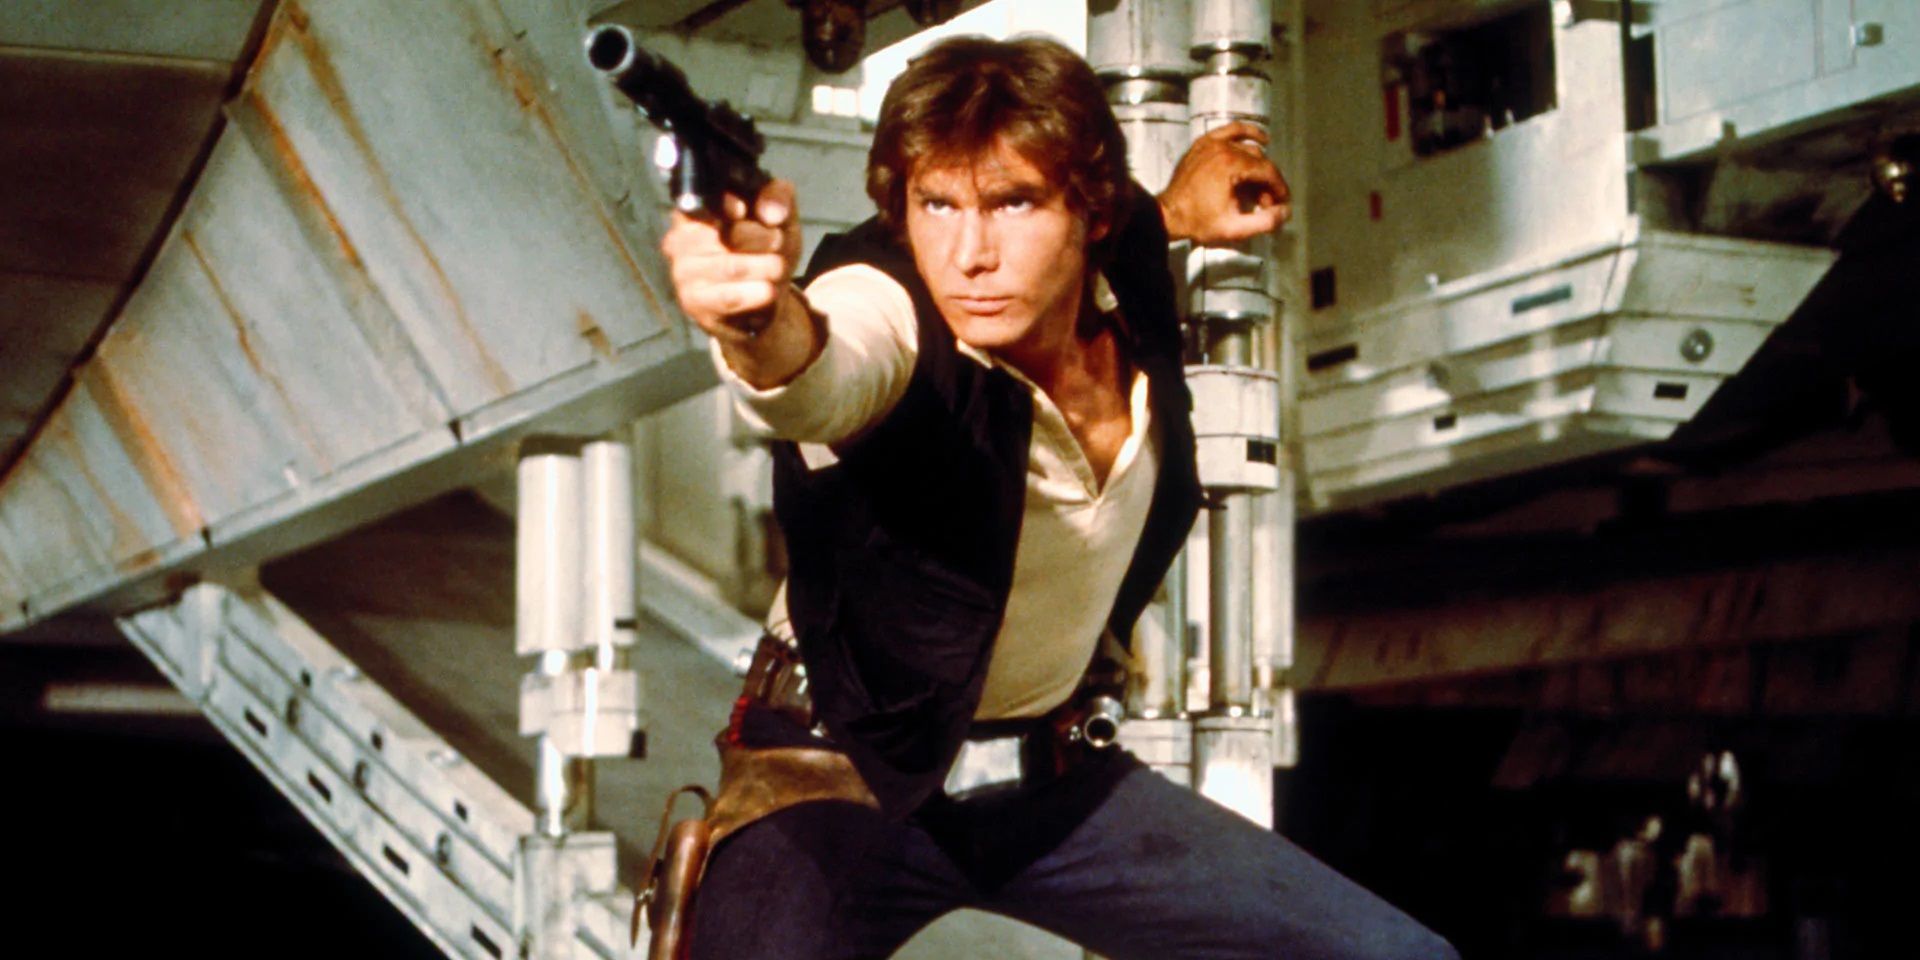 Han Solo fends off stormtroopers as he and the heroes try to escape from Tatooine in A New Hope